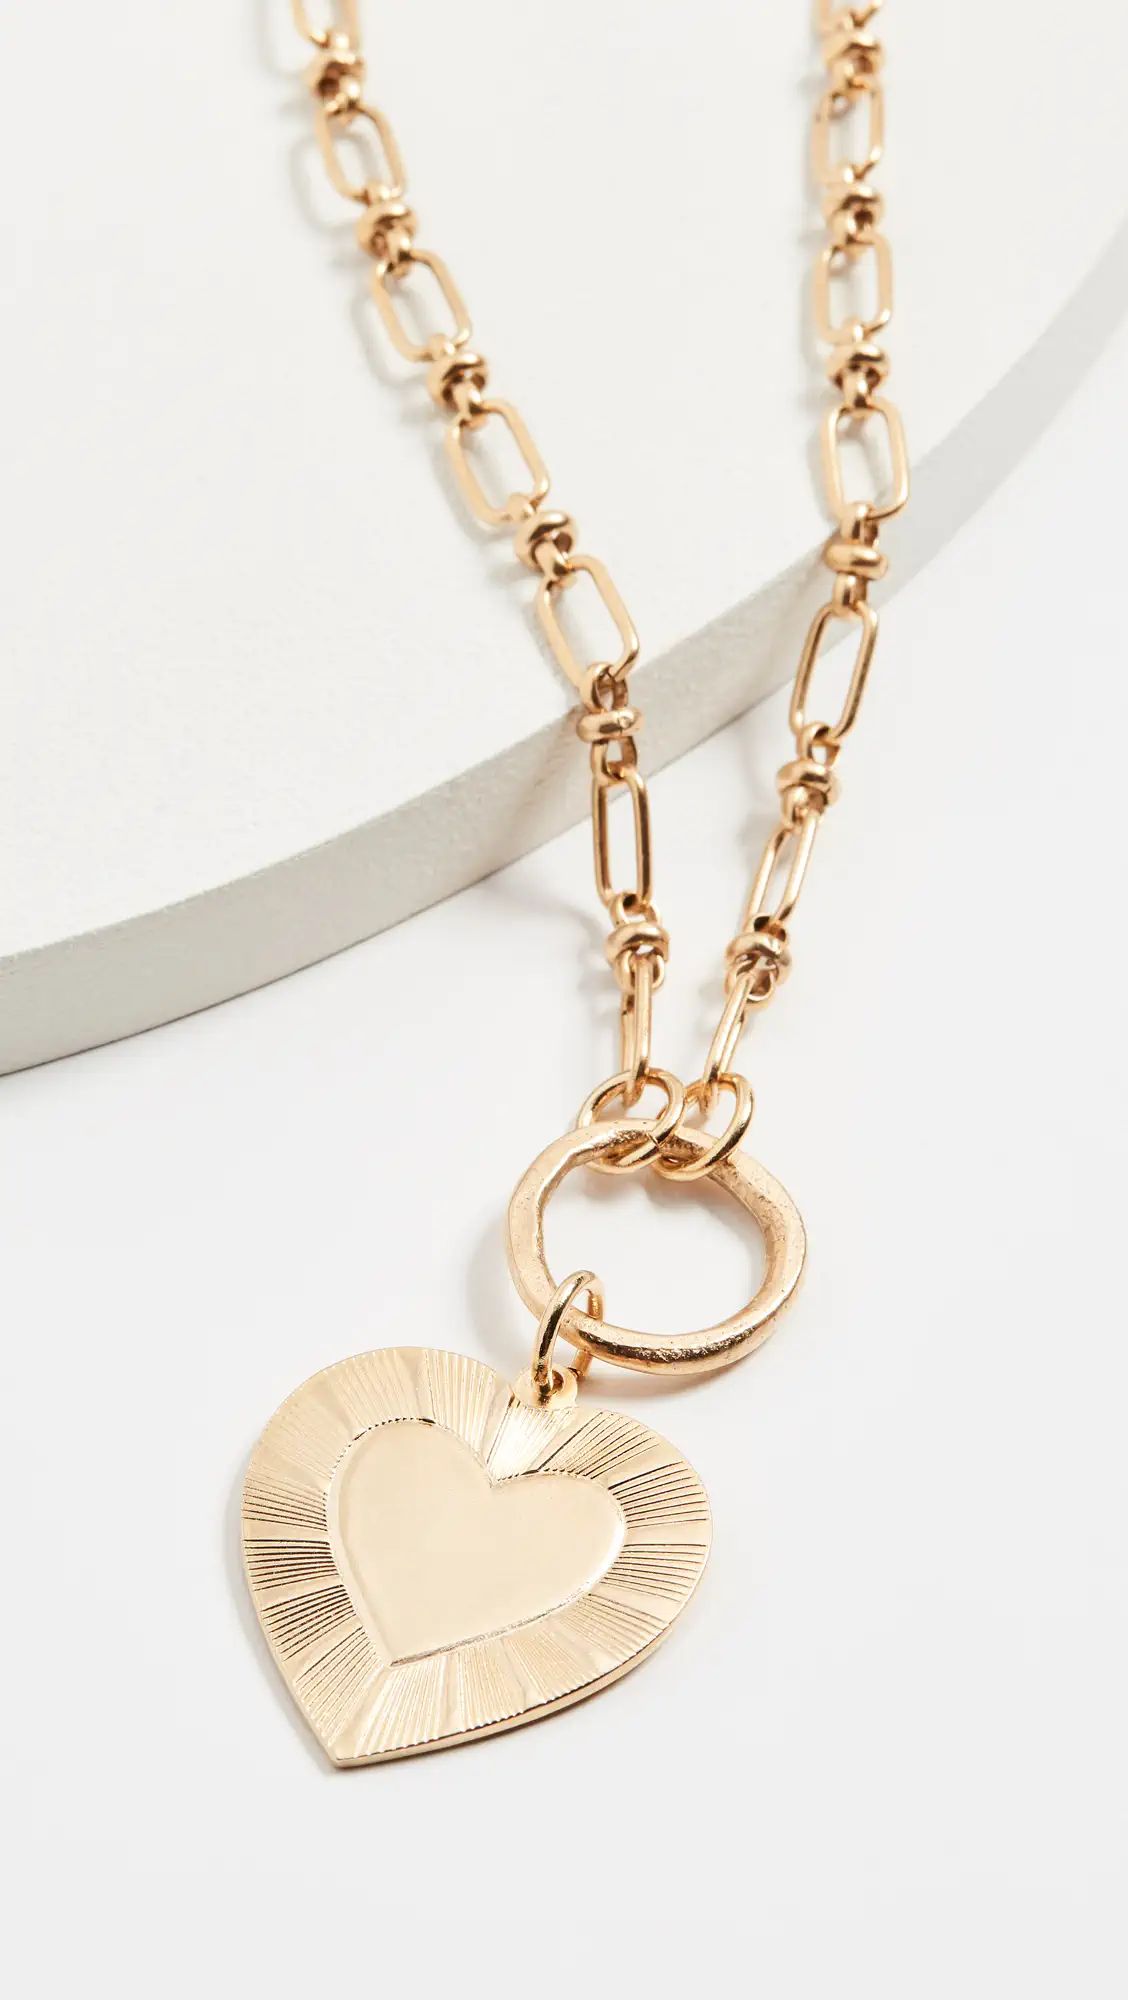 Brinker & Eliza The Best Is Yet To Come Necklace | Shopbop | Shopbop